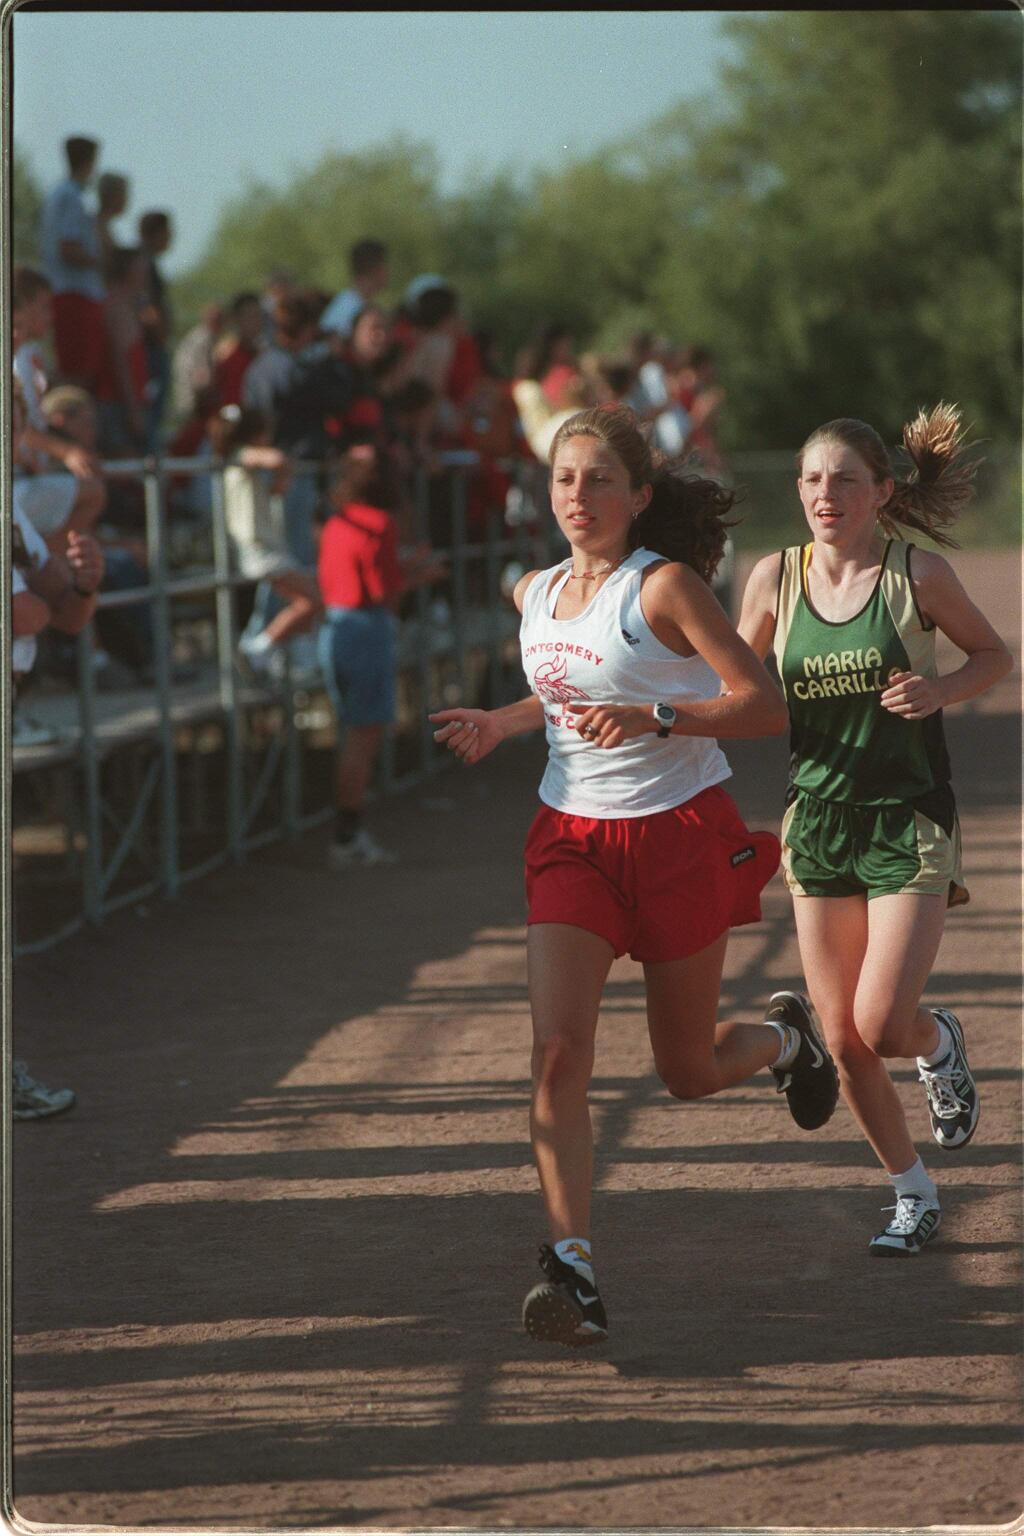 Montgomery's Sara Bei leads Maria Carrillo's Jenny Aldridge out of the stadium at Rancho Cotate High at the start of the cross country race; they finished in the same order. (JEFF KAN LEE/ PD)